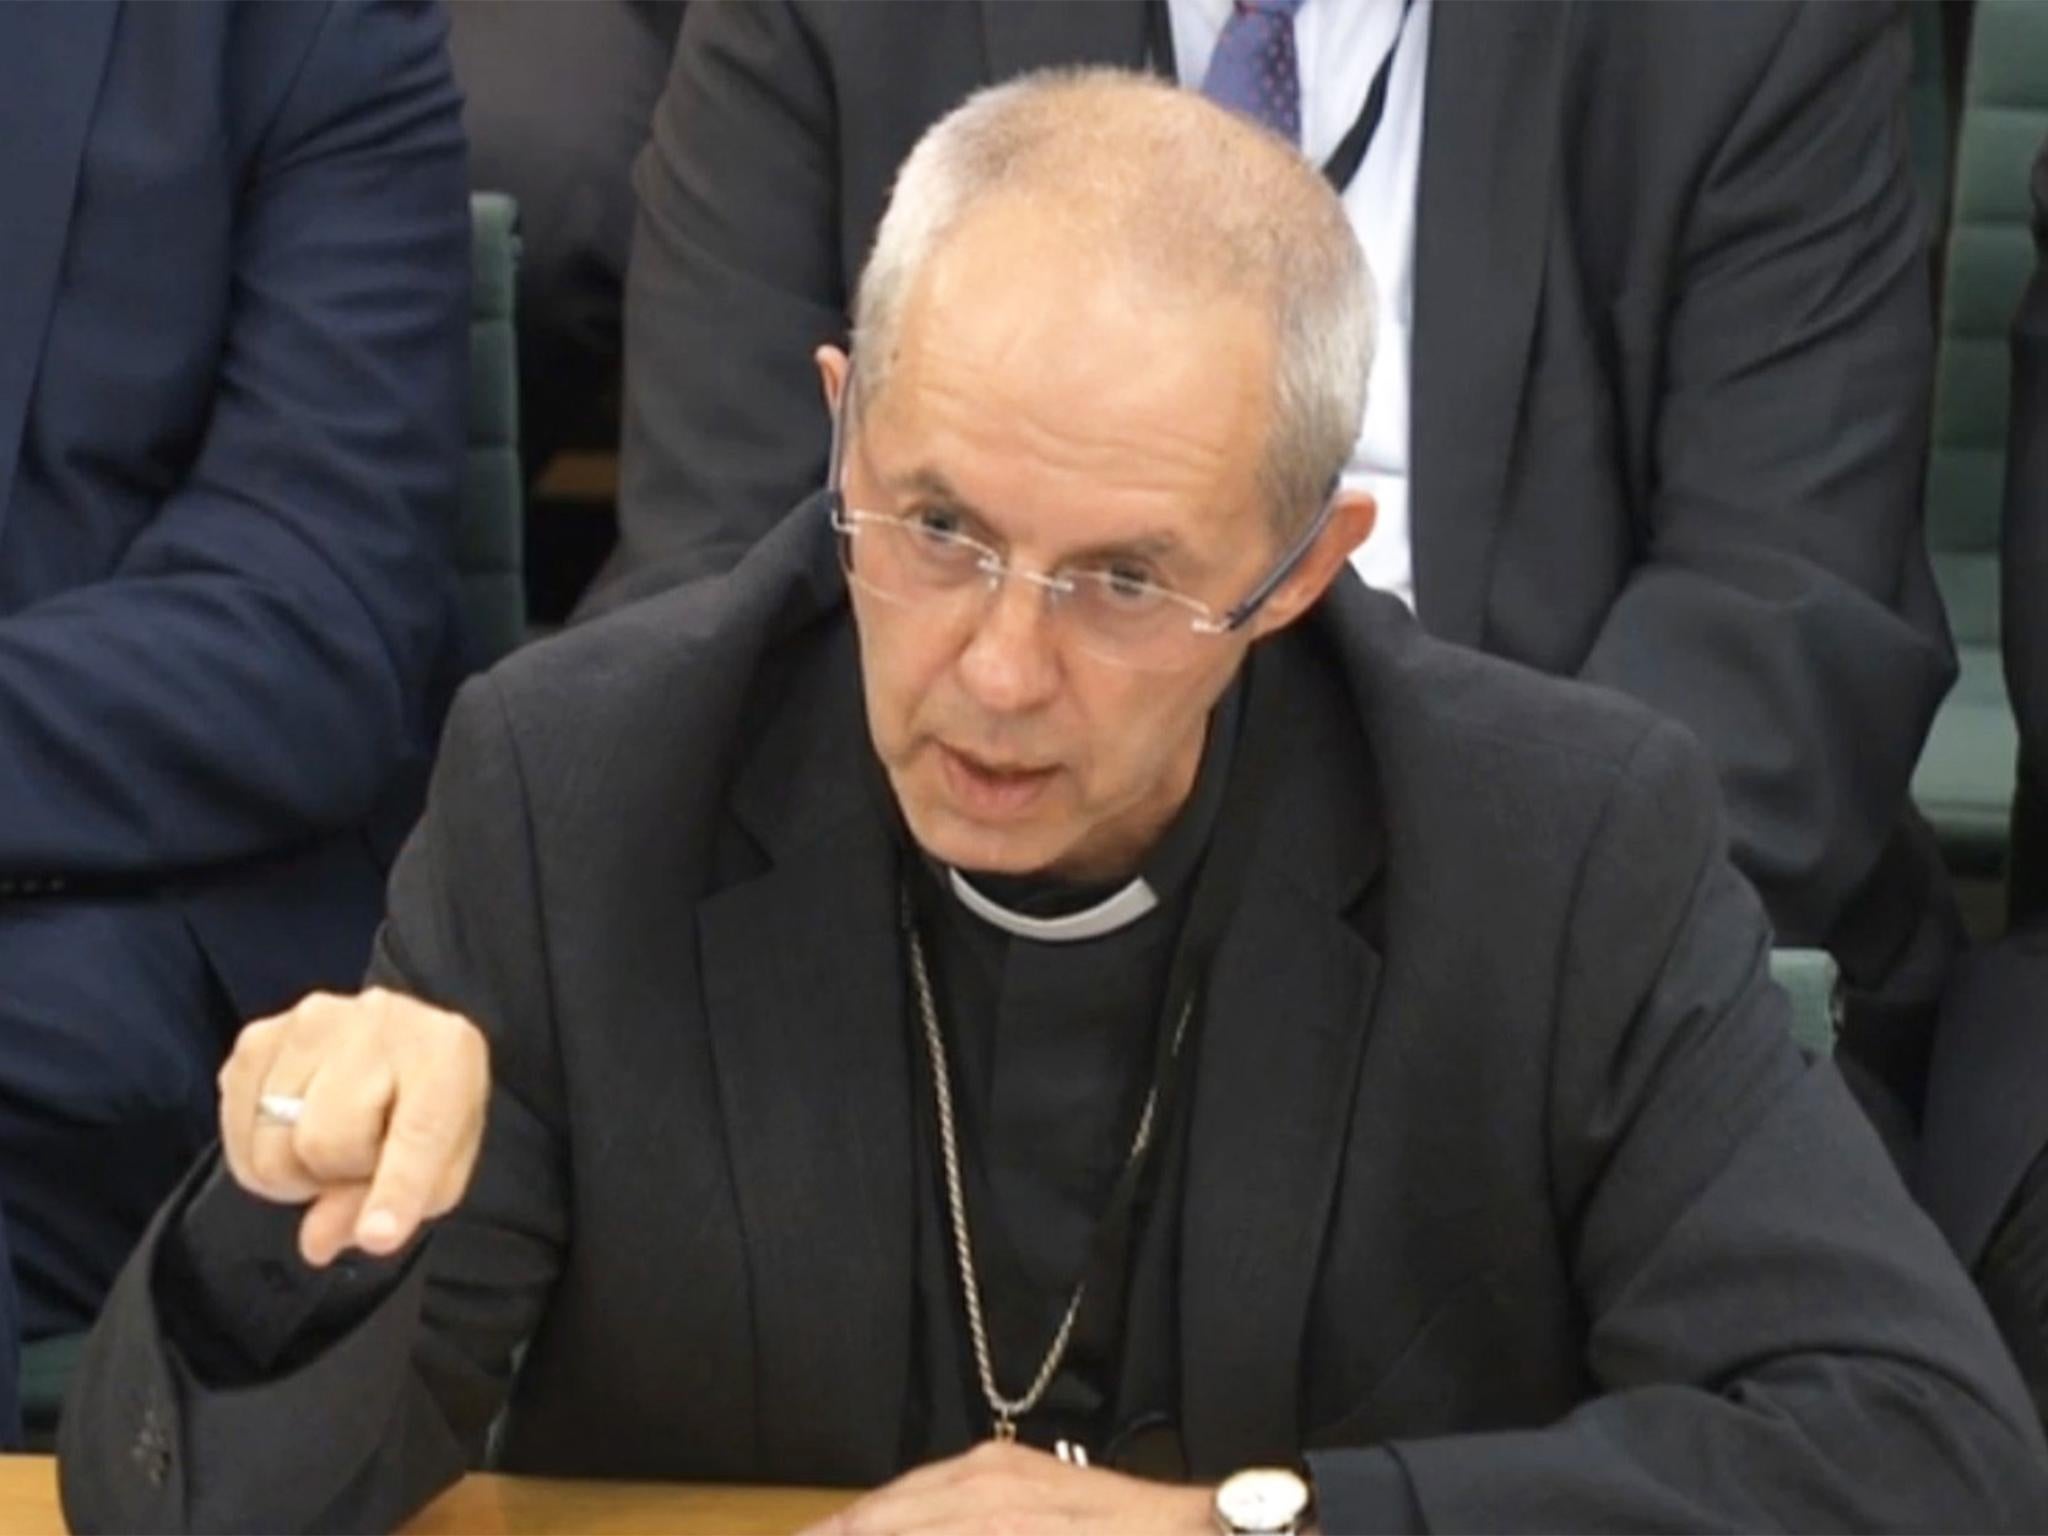 The Archbishop of Canterbury issued 'unreserved and unequivocal' apology (file image)